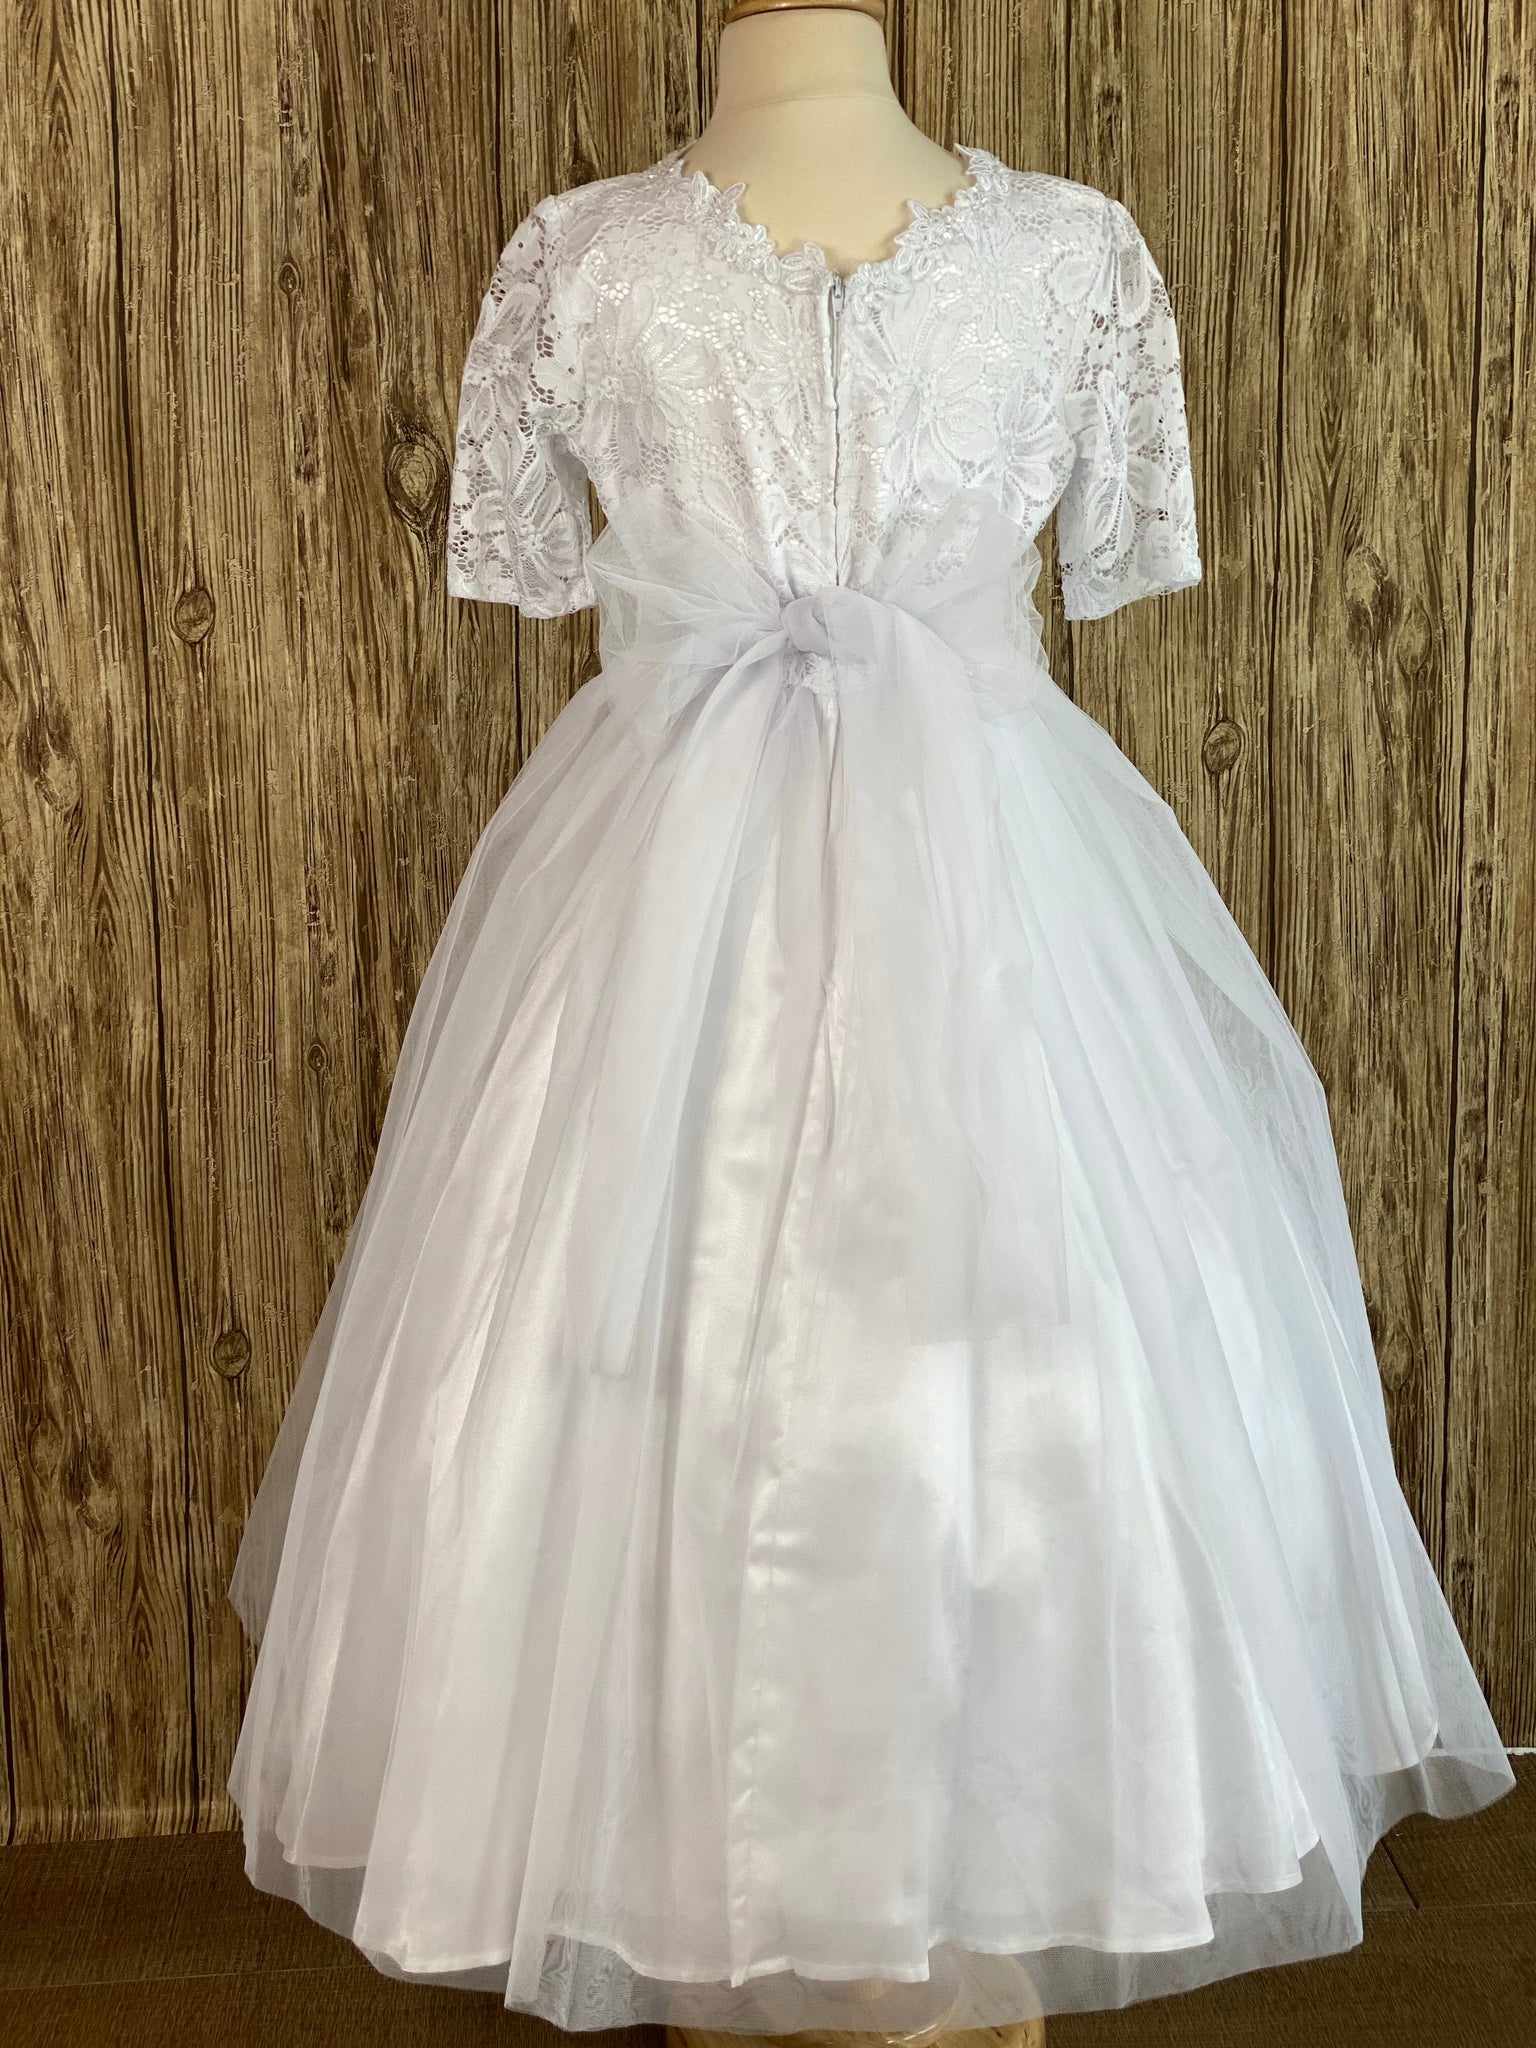 Fall in love with this First Holy Communion dress.  She will feel and look like a princess on her special event.   Lace quarter sleeve Scoop neck with floral trim Lace over satin bodice Floral belt Tulle over satin skirt Tulle ribbon for bow Zipper closure